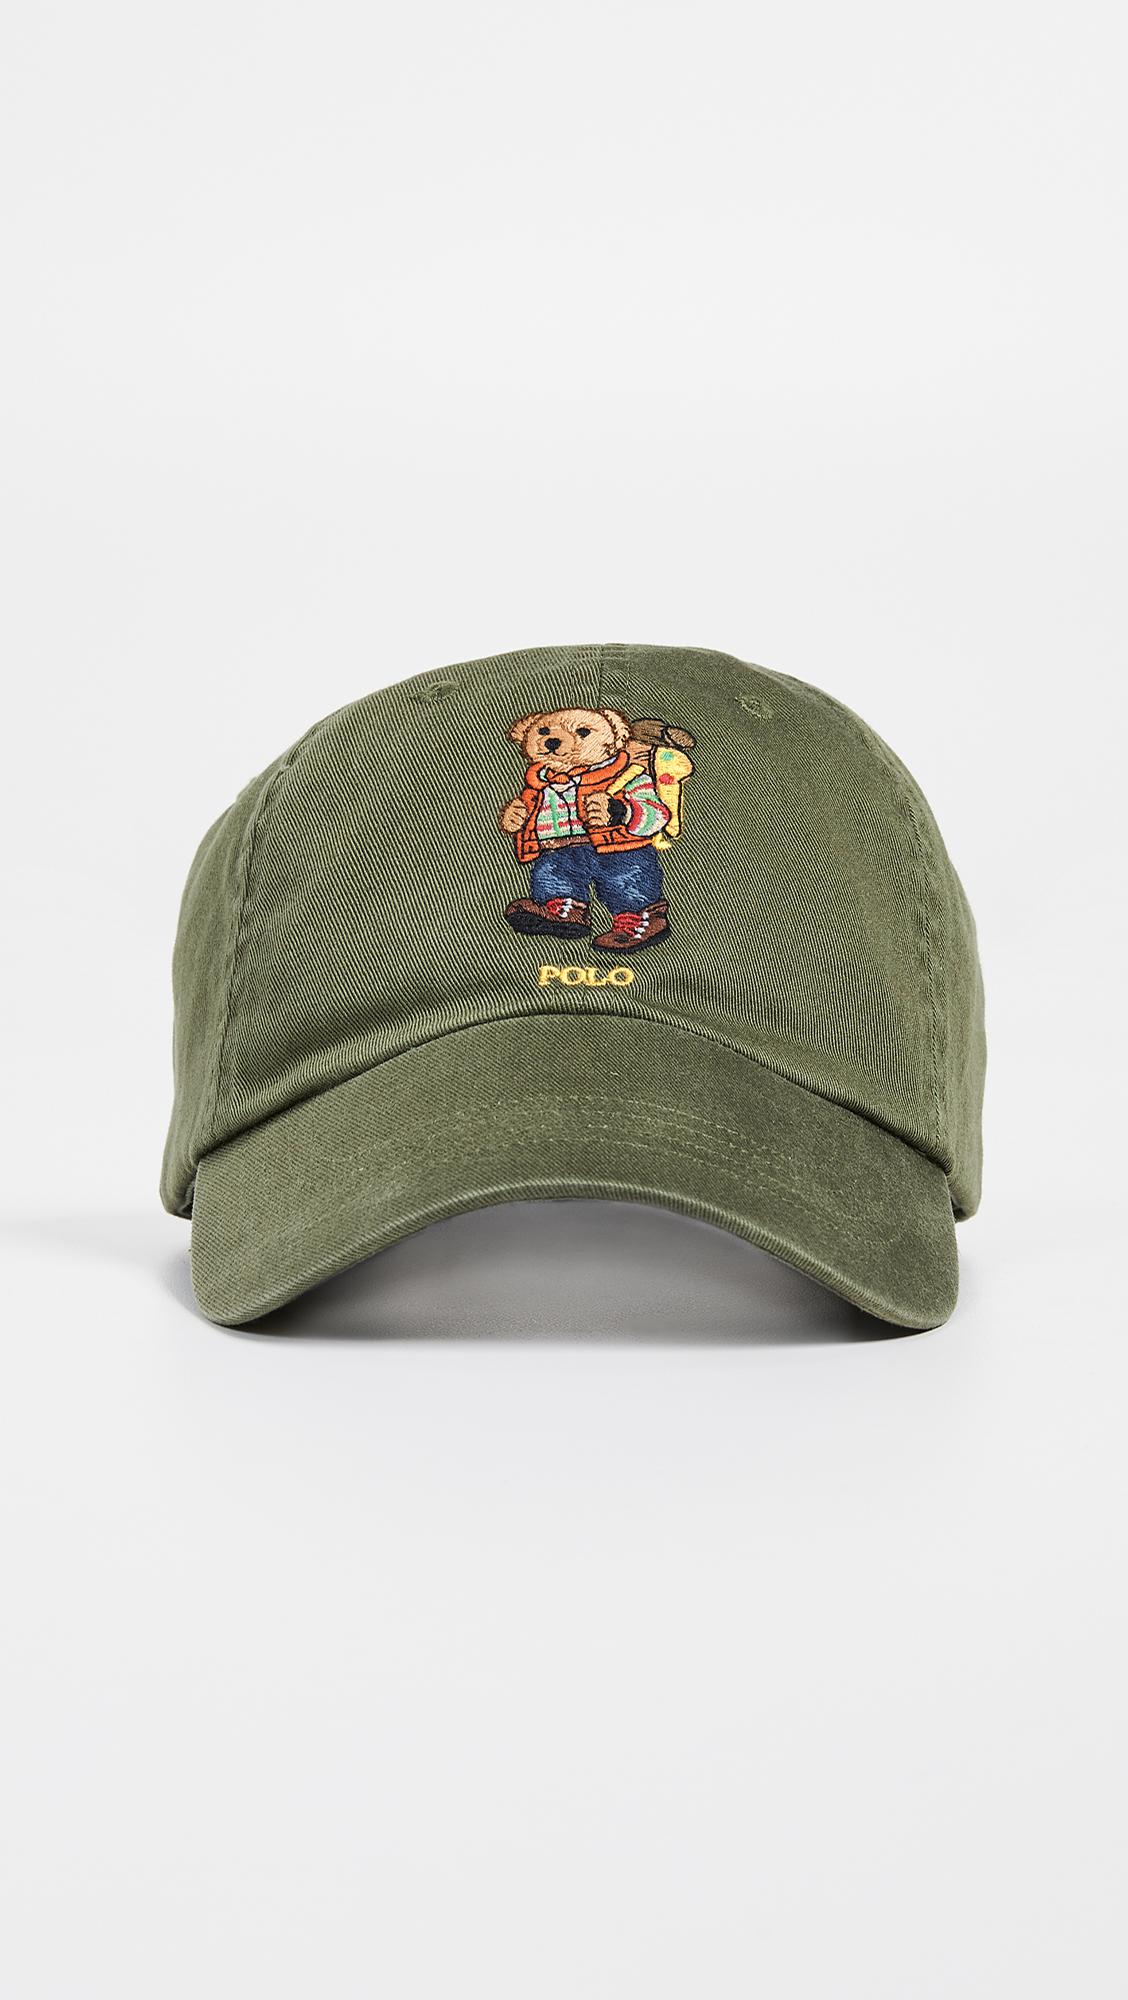 Polo Ralph Lauren Cotton Hiking Bear Cap in Olive (Green) for Men - Lyst